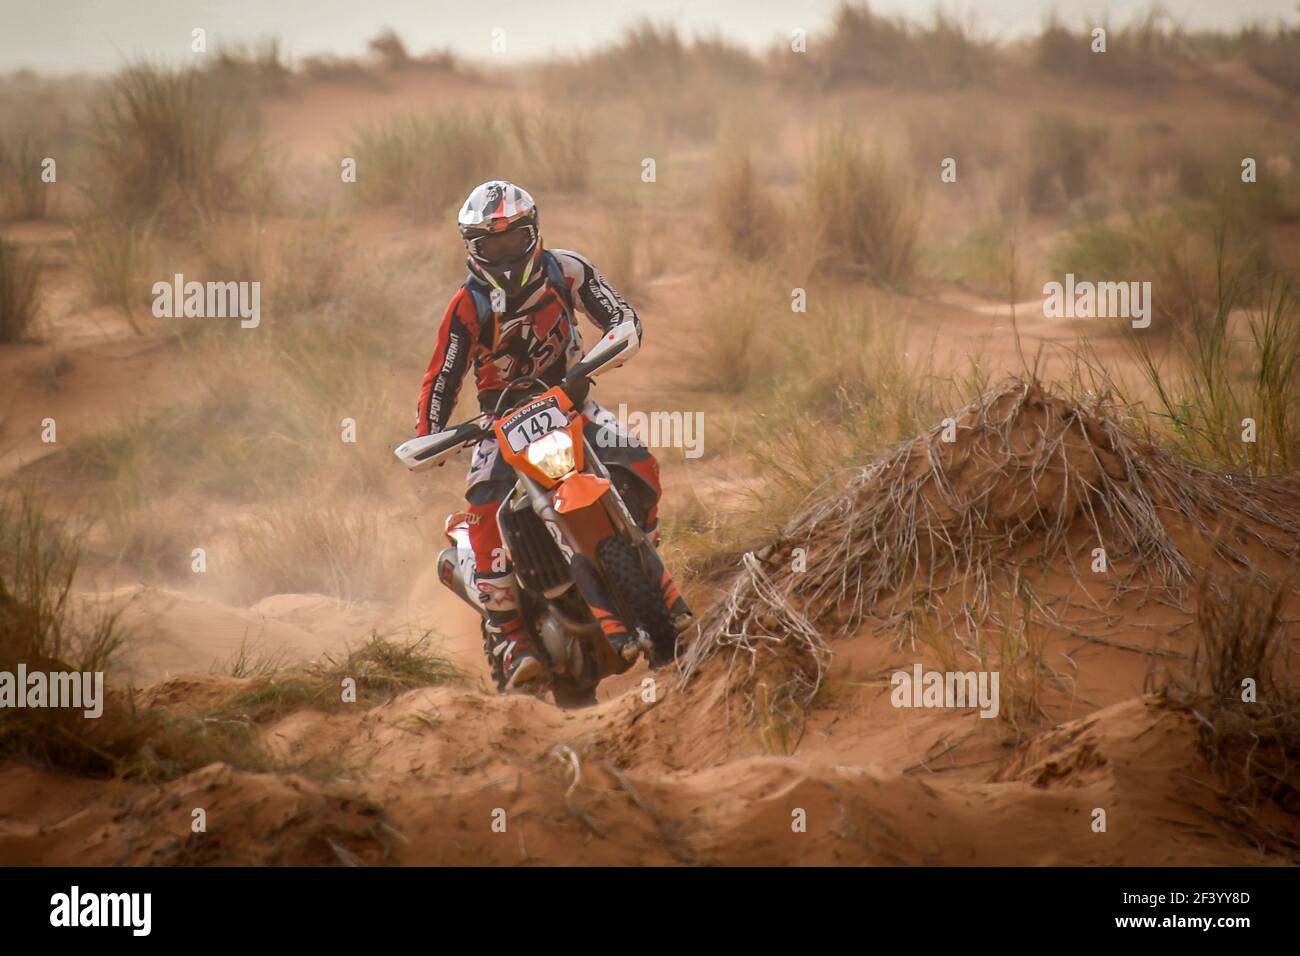 142 PUILLET Thierry (FRA), KTM EXCF 450, Enduro Cup, action during Rally of Morocco 2018, Stage 1, Fes to Erfoud, october 5 - Photo Eric Vargiolu / DPPI Stock Photo